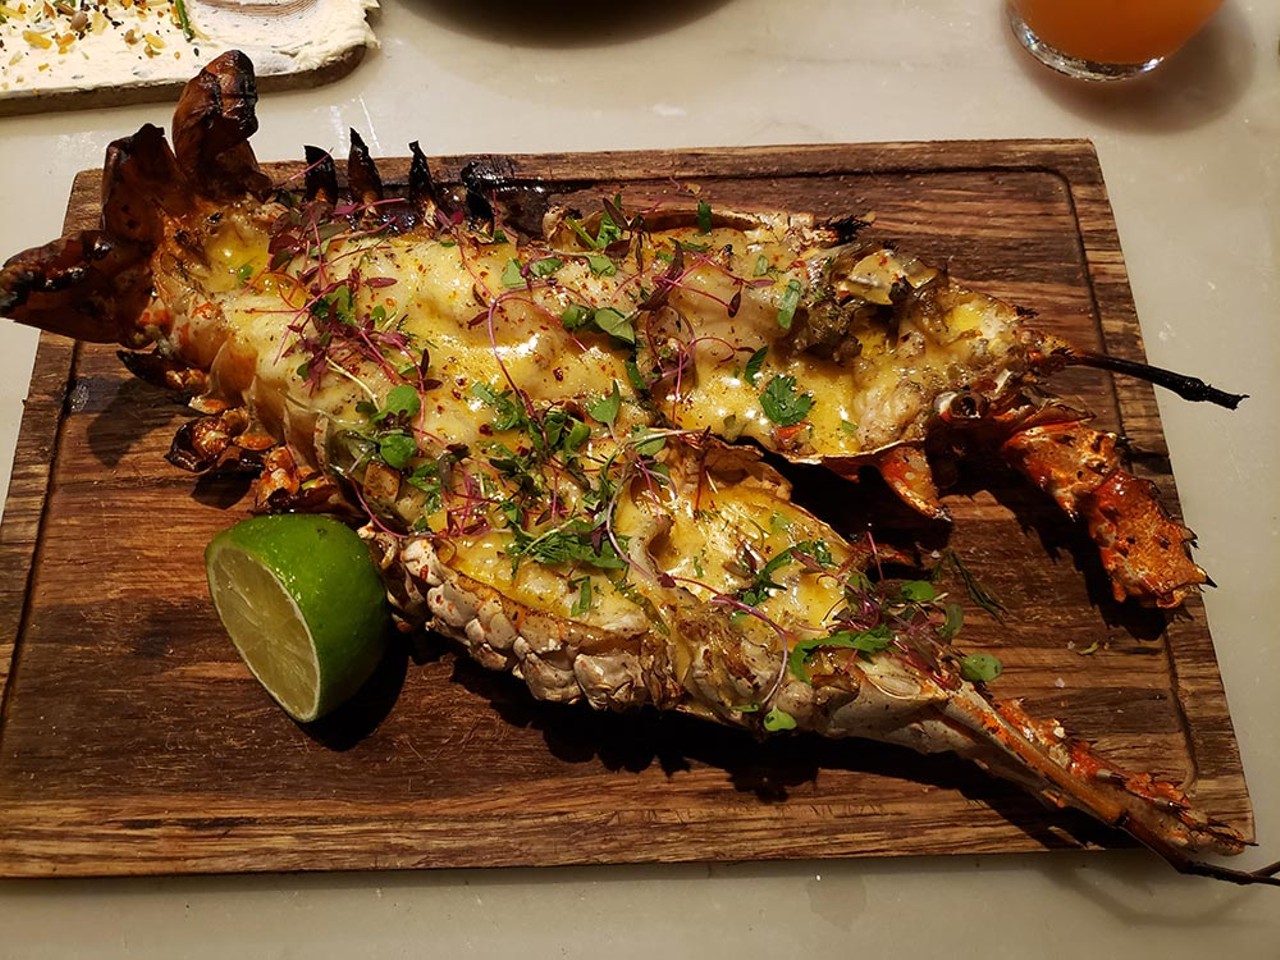 
Key West spiny lobster, Luke's Kitchen and Bar
When chef Jason Campbell announced on Instagram the arrival of these spiky buggers, I made a beeline to Luke's in Maitland. The lobster, jerk-rubbed with Florida datil peppers then fire-grilled over Florida white oak before being glossed in a citrus beurre mont&eacute;, comprised a hidden additive: that secret ingredient that allows you to block out the world.
